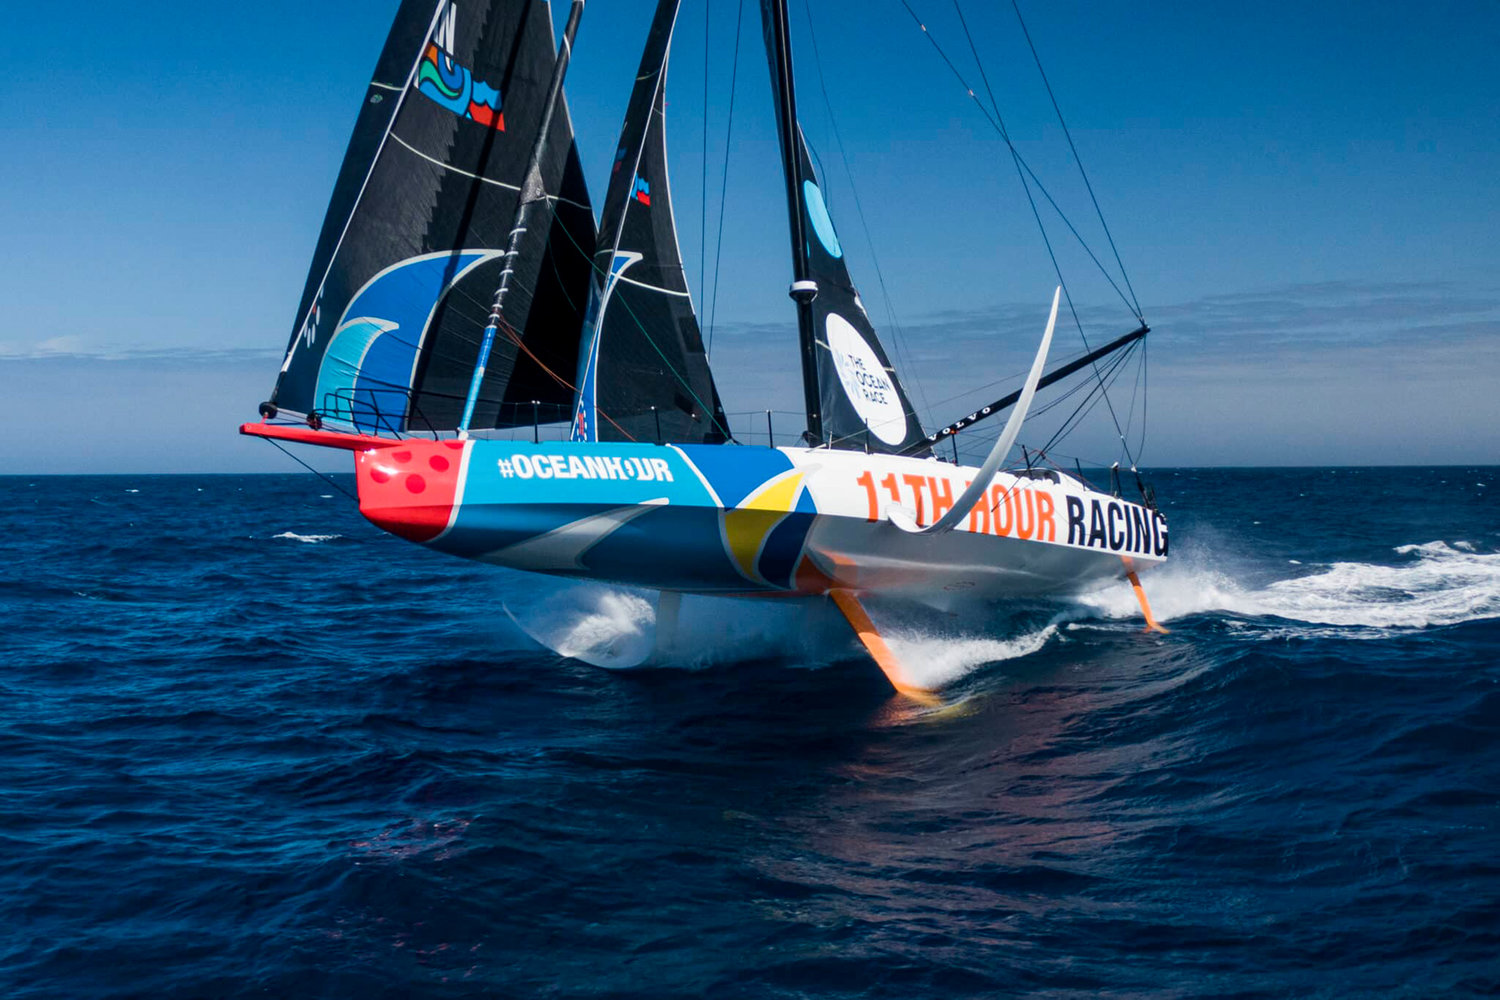 The Ocean Race 2022-23 - 04 March 2023, Leg 3 onboard 11th Hour Racing Team. Malama enjoying nice conditions with flat water and a building breeze at 45-degrees south.